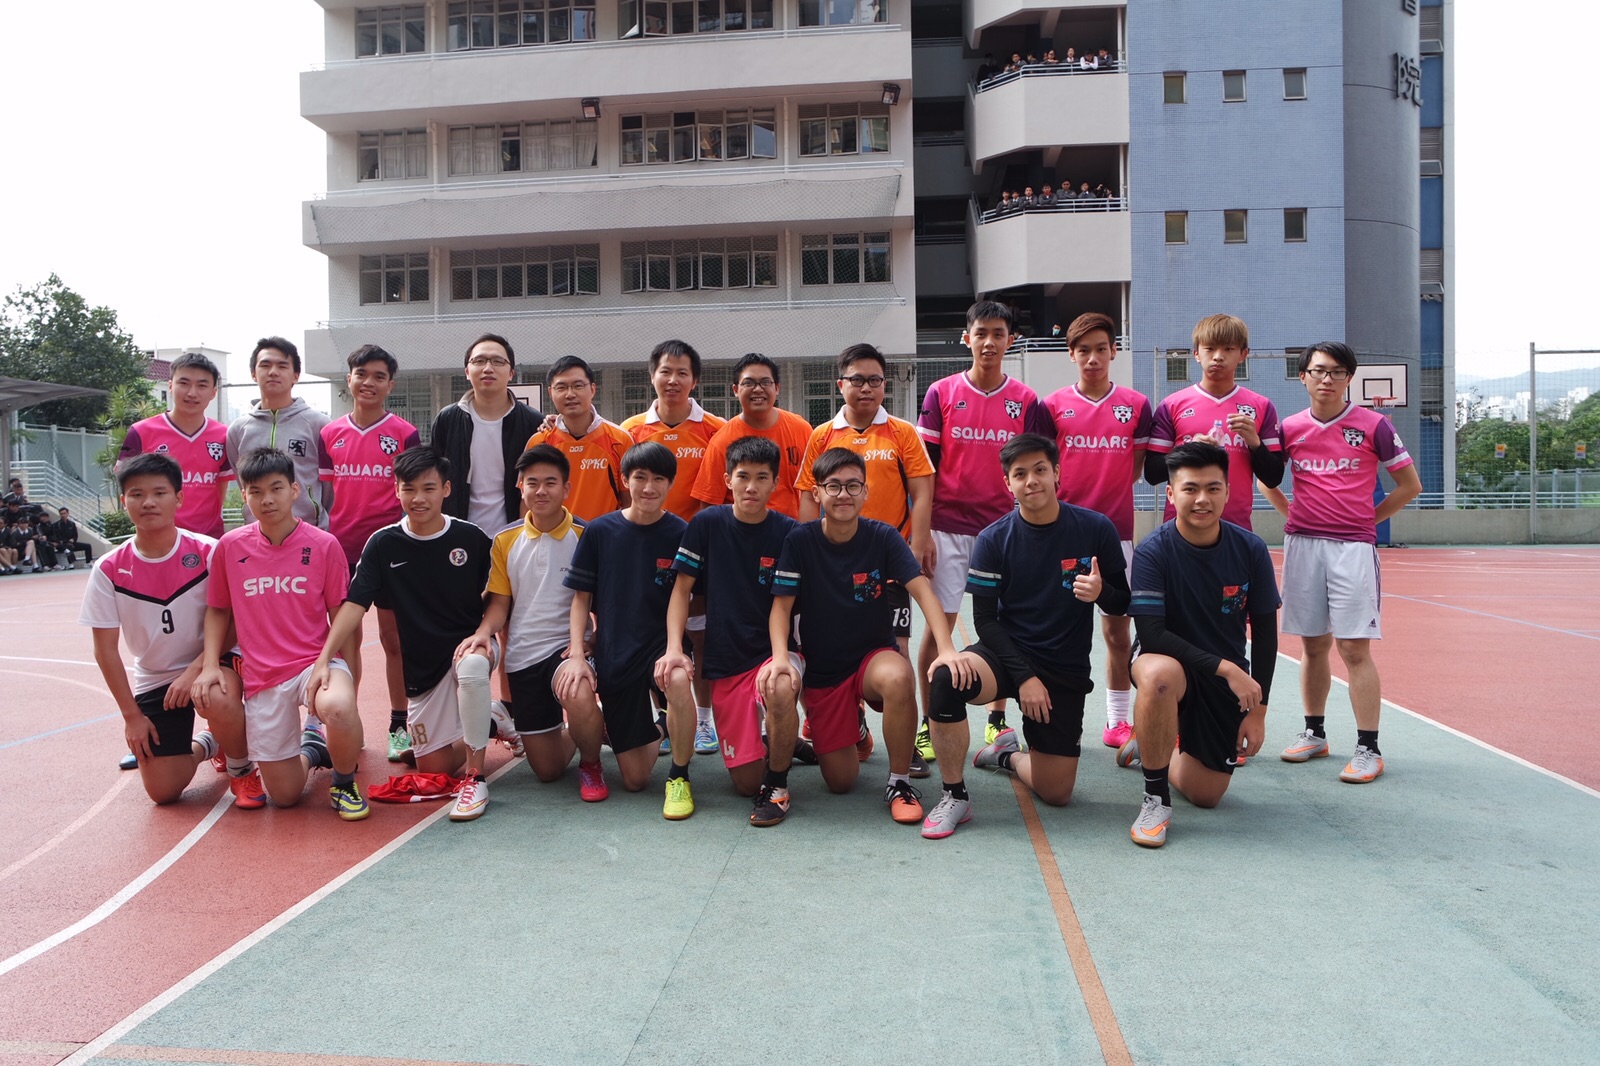 The Inter-Class Soccer Competition